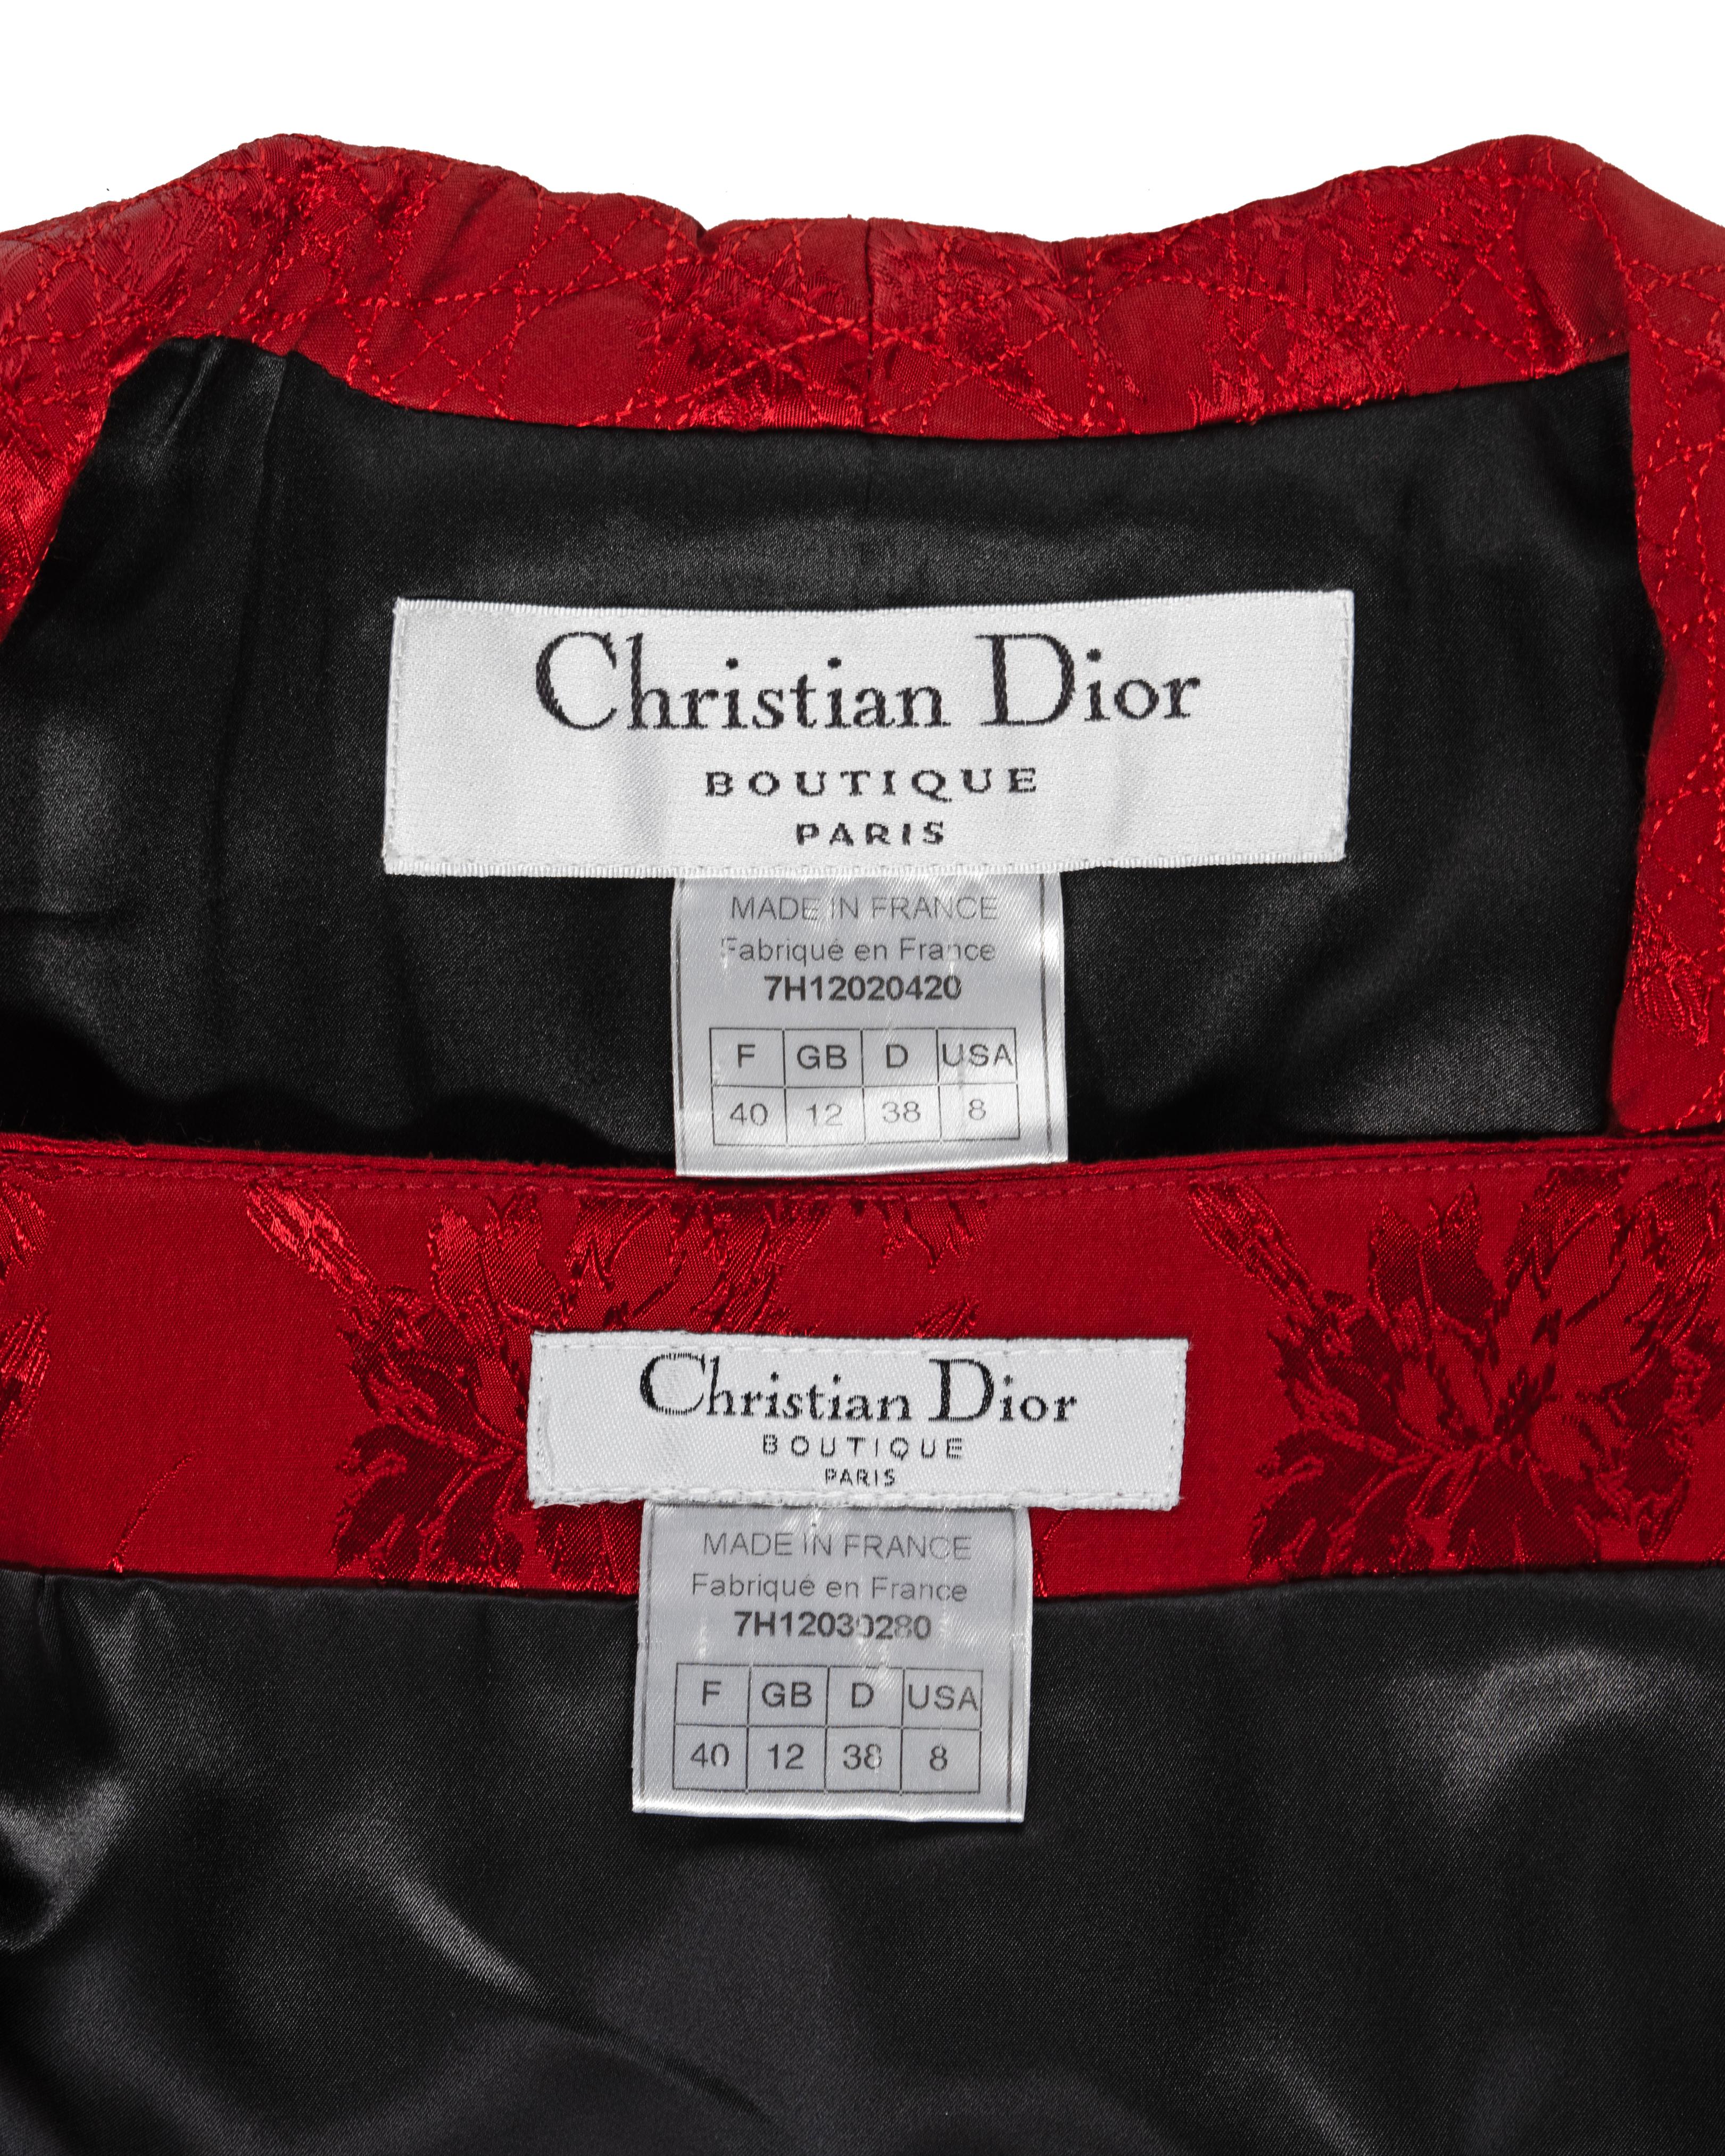 Christian Dior by John Galliano Red Floral Damask Evening Ensemble, fw 1997 16